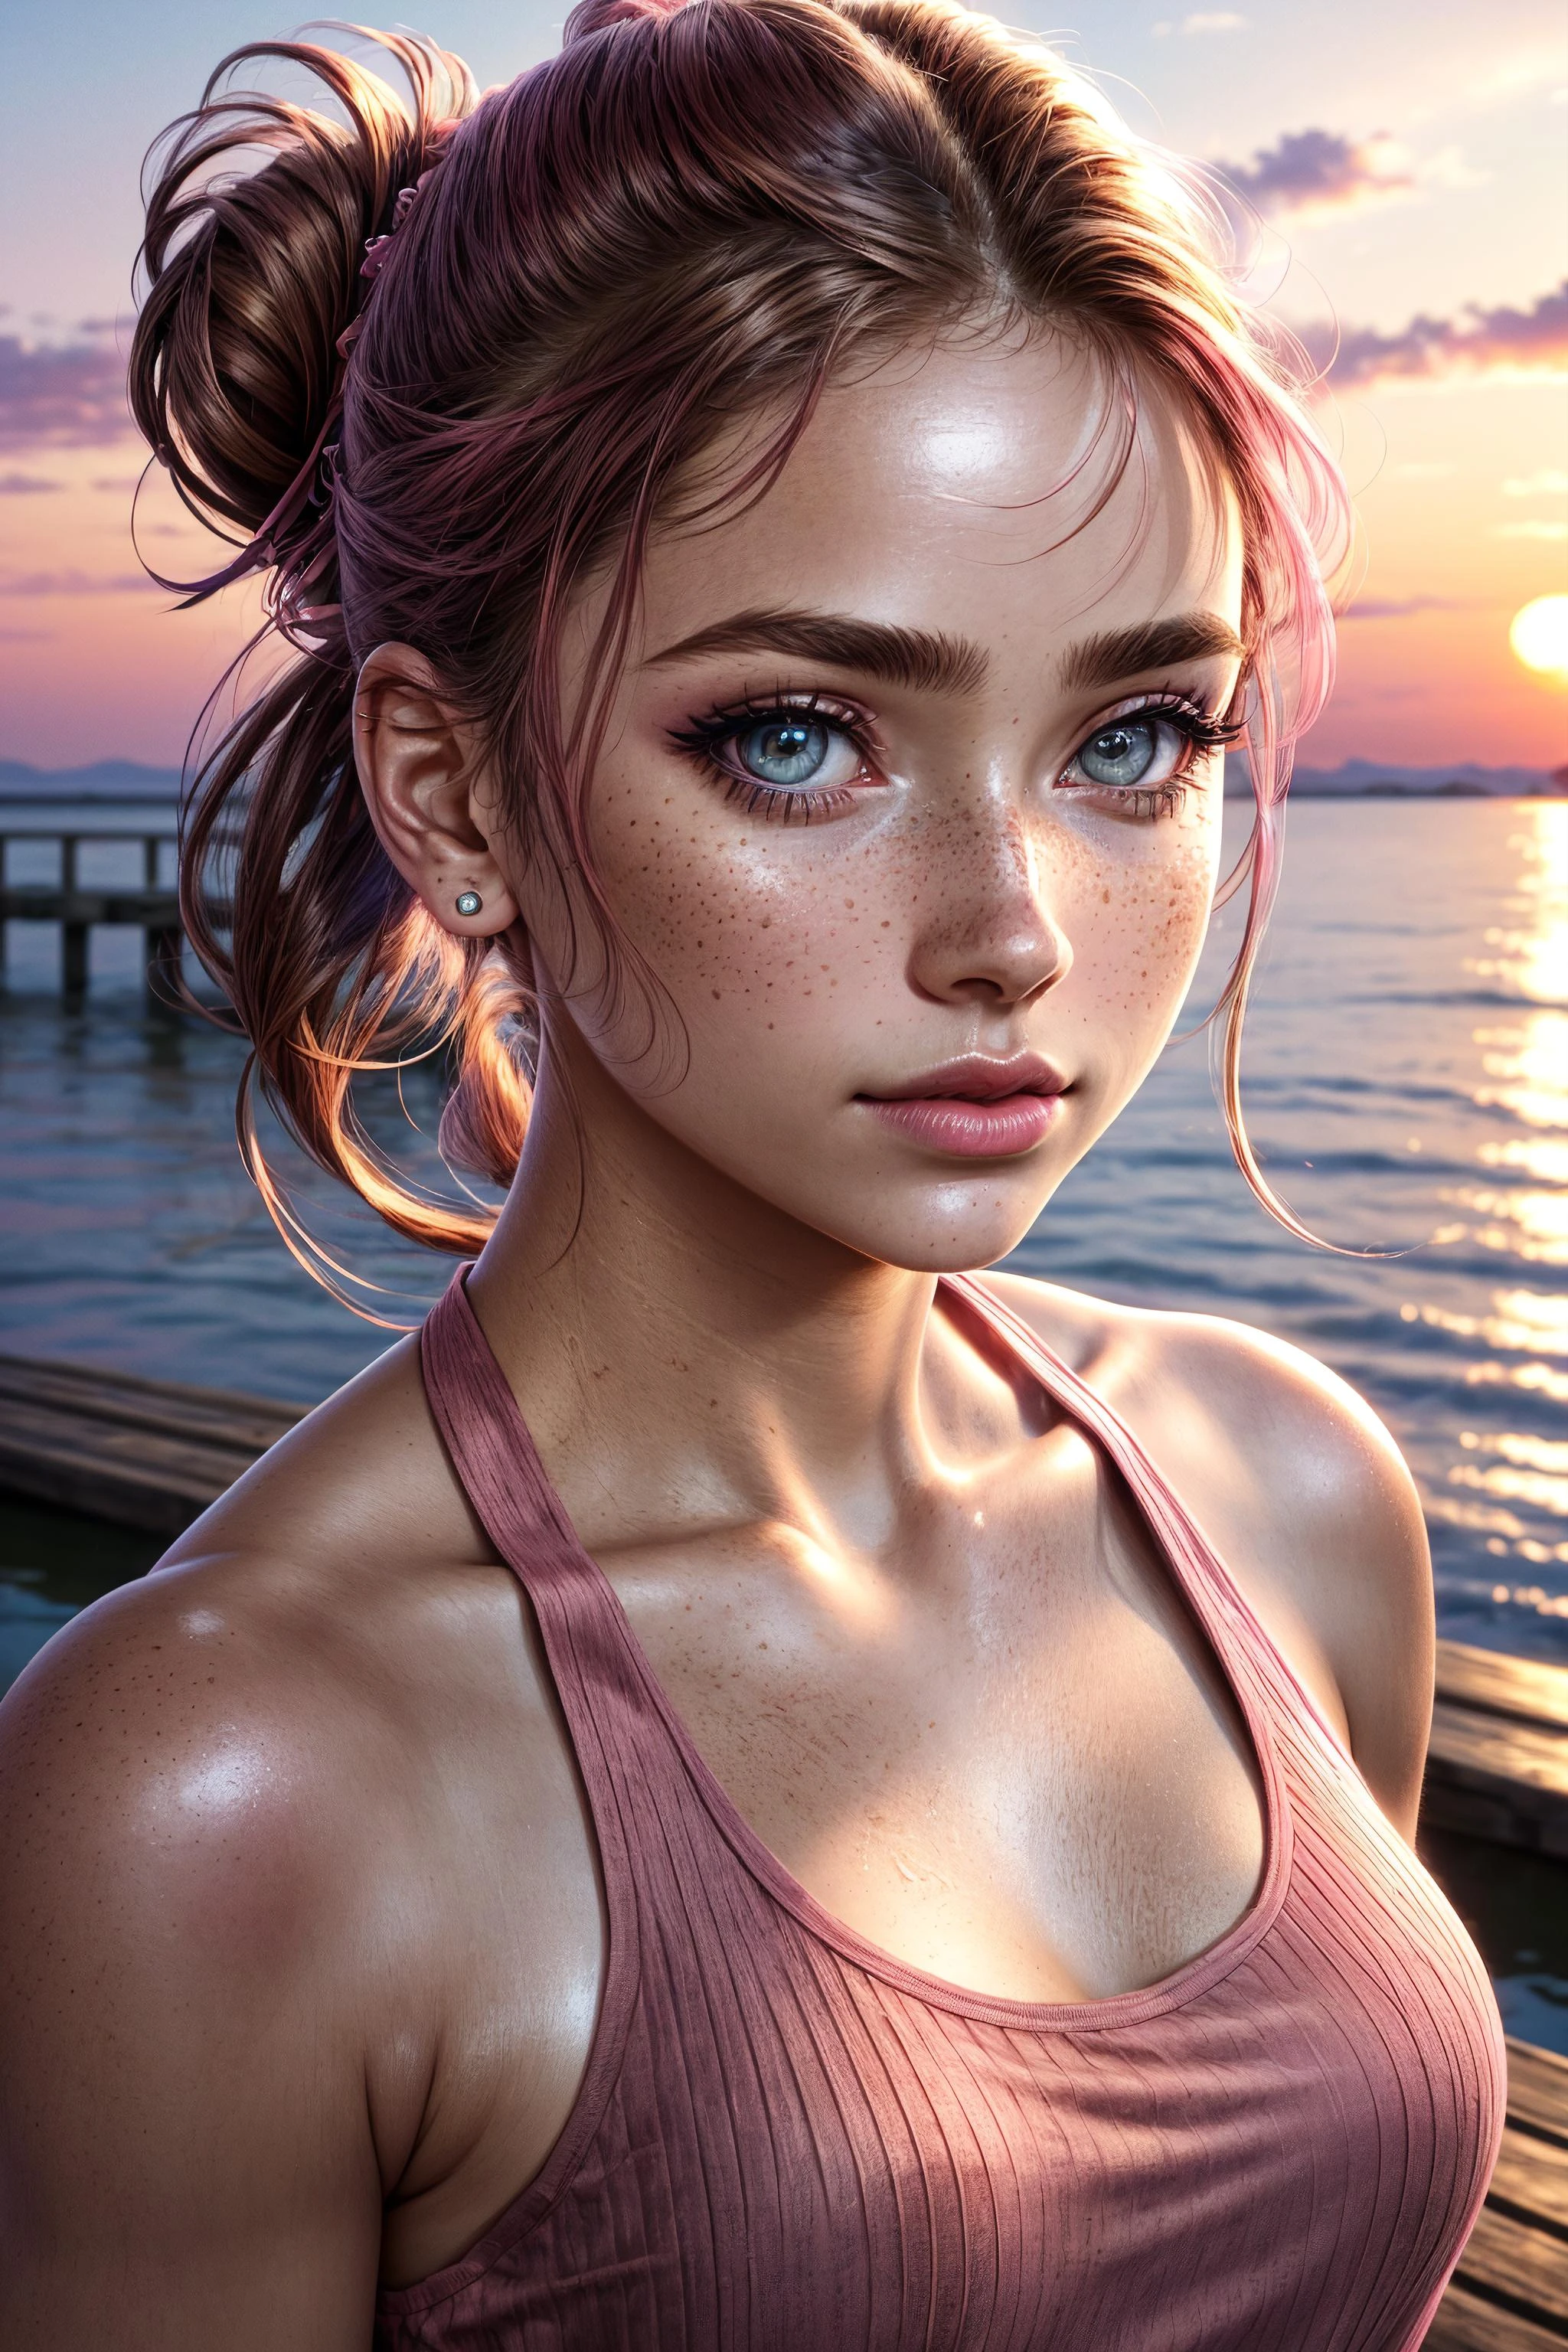 on the wooden pier, (tank top:1.2), (pink halter top:1.4), 1girl, fully clothed, looking at viewer, (extreme close up, ecu, full face shot:1.3), (detailed face:1.4), (candid photography:1.2), colorful, content, relaxed, soft smile, (shoulder length hair:1.3), (foundation, concealer, mascara, rosy cheeks, smokey eye makeup, lipstick:1.3), nail polish, (beautiful, gorgeous, flawless complexion:1.2), hair clips, hair bands, ribbons, lip gloss, shiny lips, freckles, antique rose, rustic brown, warm beige, dusty blue, faded olive, standing, (sunset, dusk:1.25), fcDetailPortrait, professional photography, HDR (High Dynamic Range), subsurface scattering, realistic, heavy shadow, masterpiece, ultra realistic, high resolution, golden ratio, rule of thirds, intricate, high detail, film photography, DSLR, (hair up in ponytail:1.3), (blue eyes:0.8), brunette hair